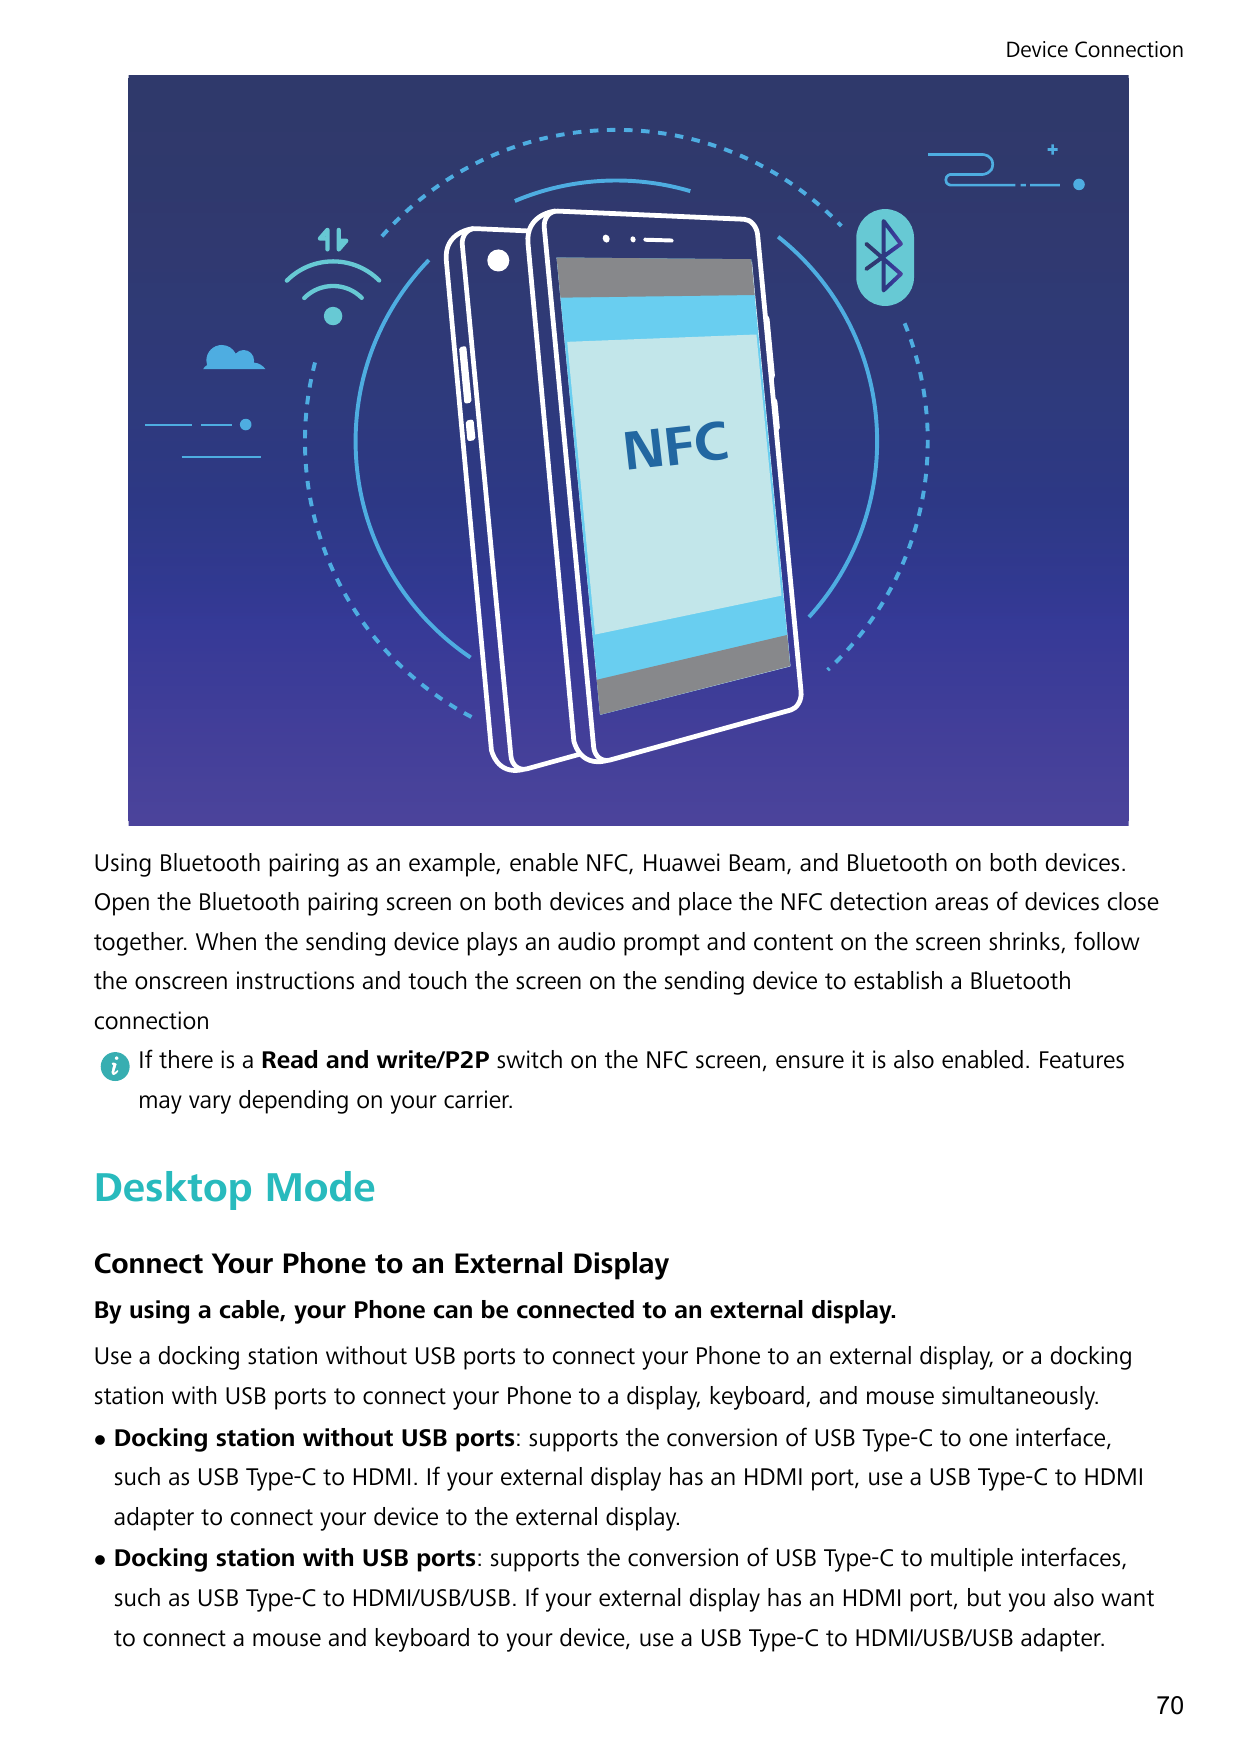 Device ConnectionNFCUsing Bluetooth pairing as an example, enable NFC, Huawei Beam, and Bluetooth on both devices.Open the Bluet